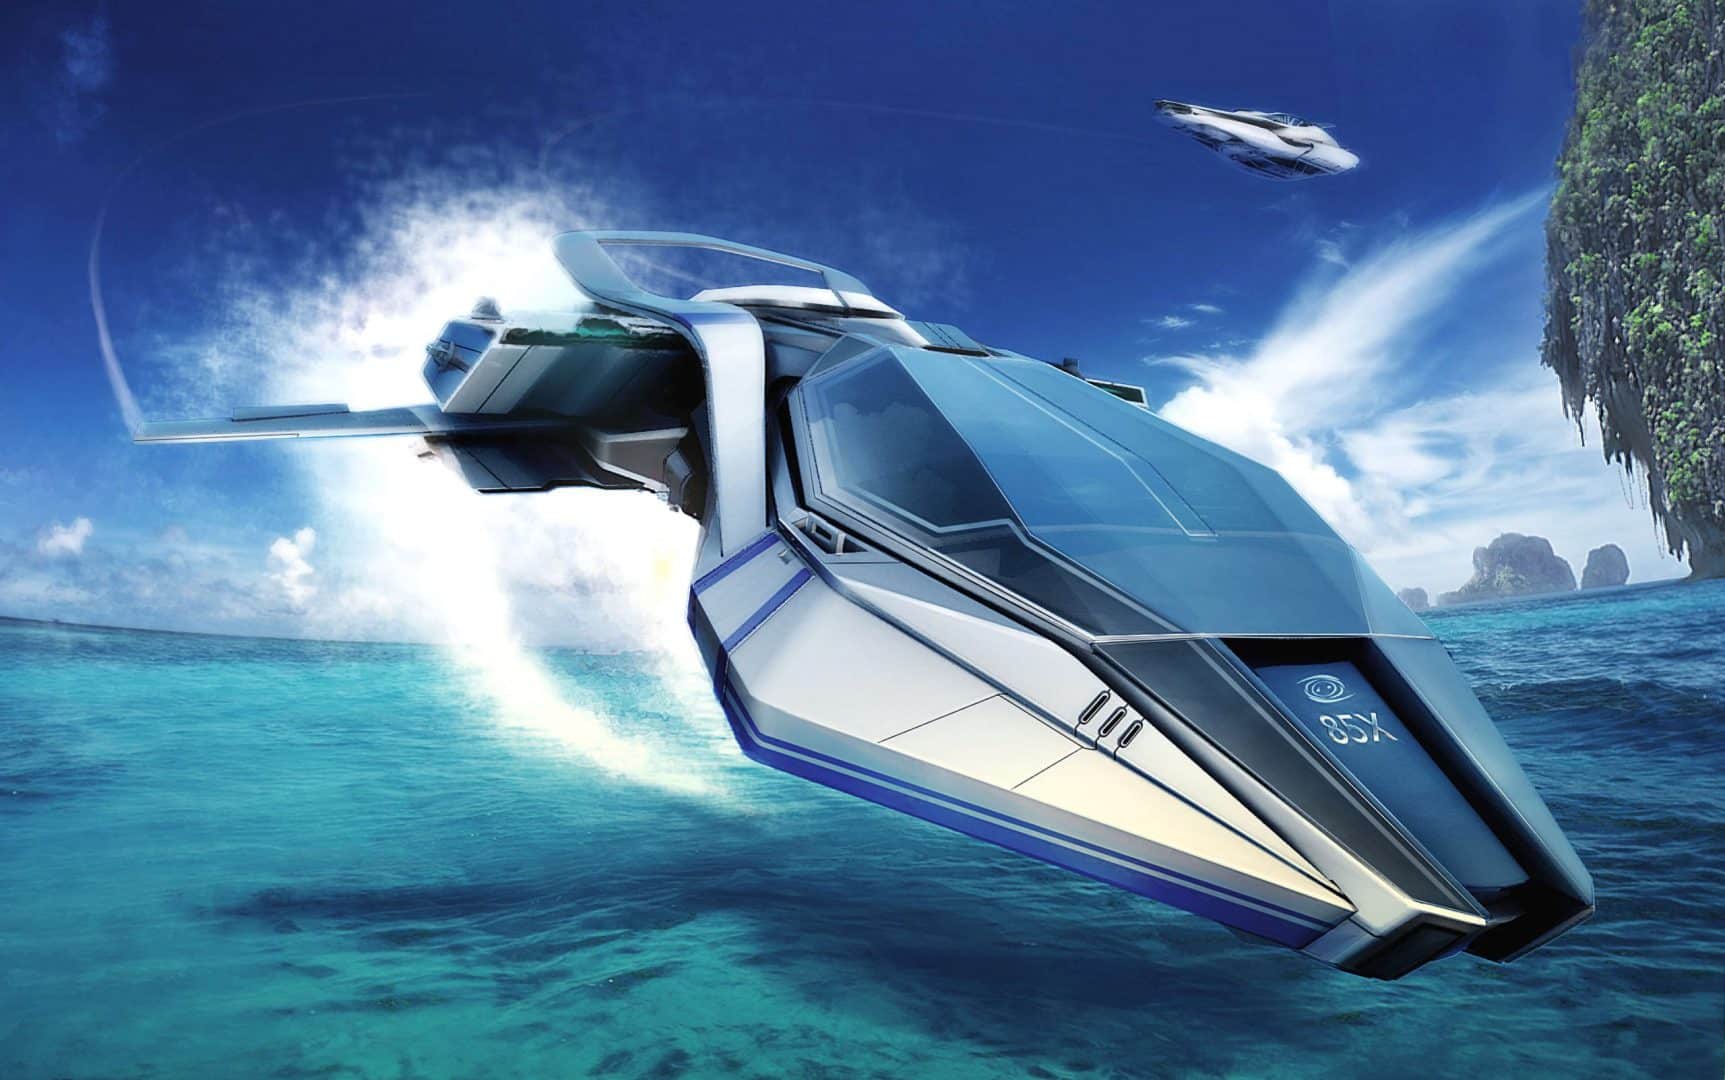 Star Citizen' Must Admit Its For-Sale Concept Ships Do Not Exist